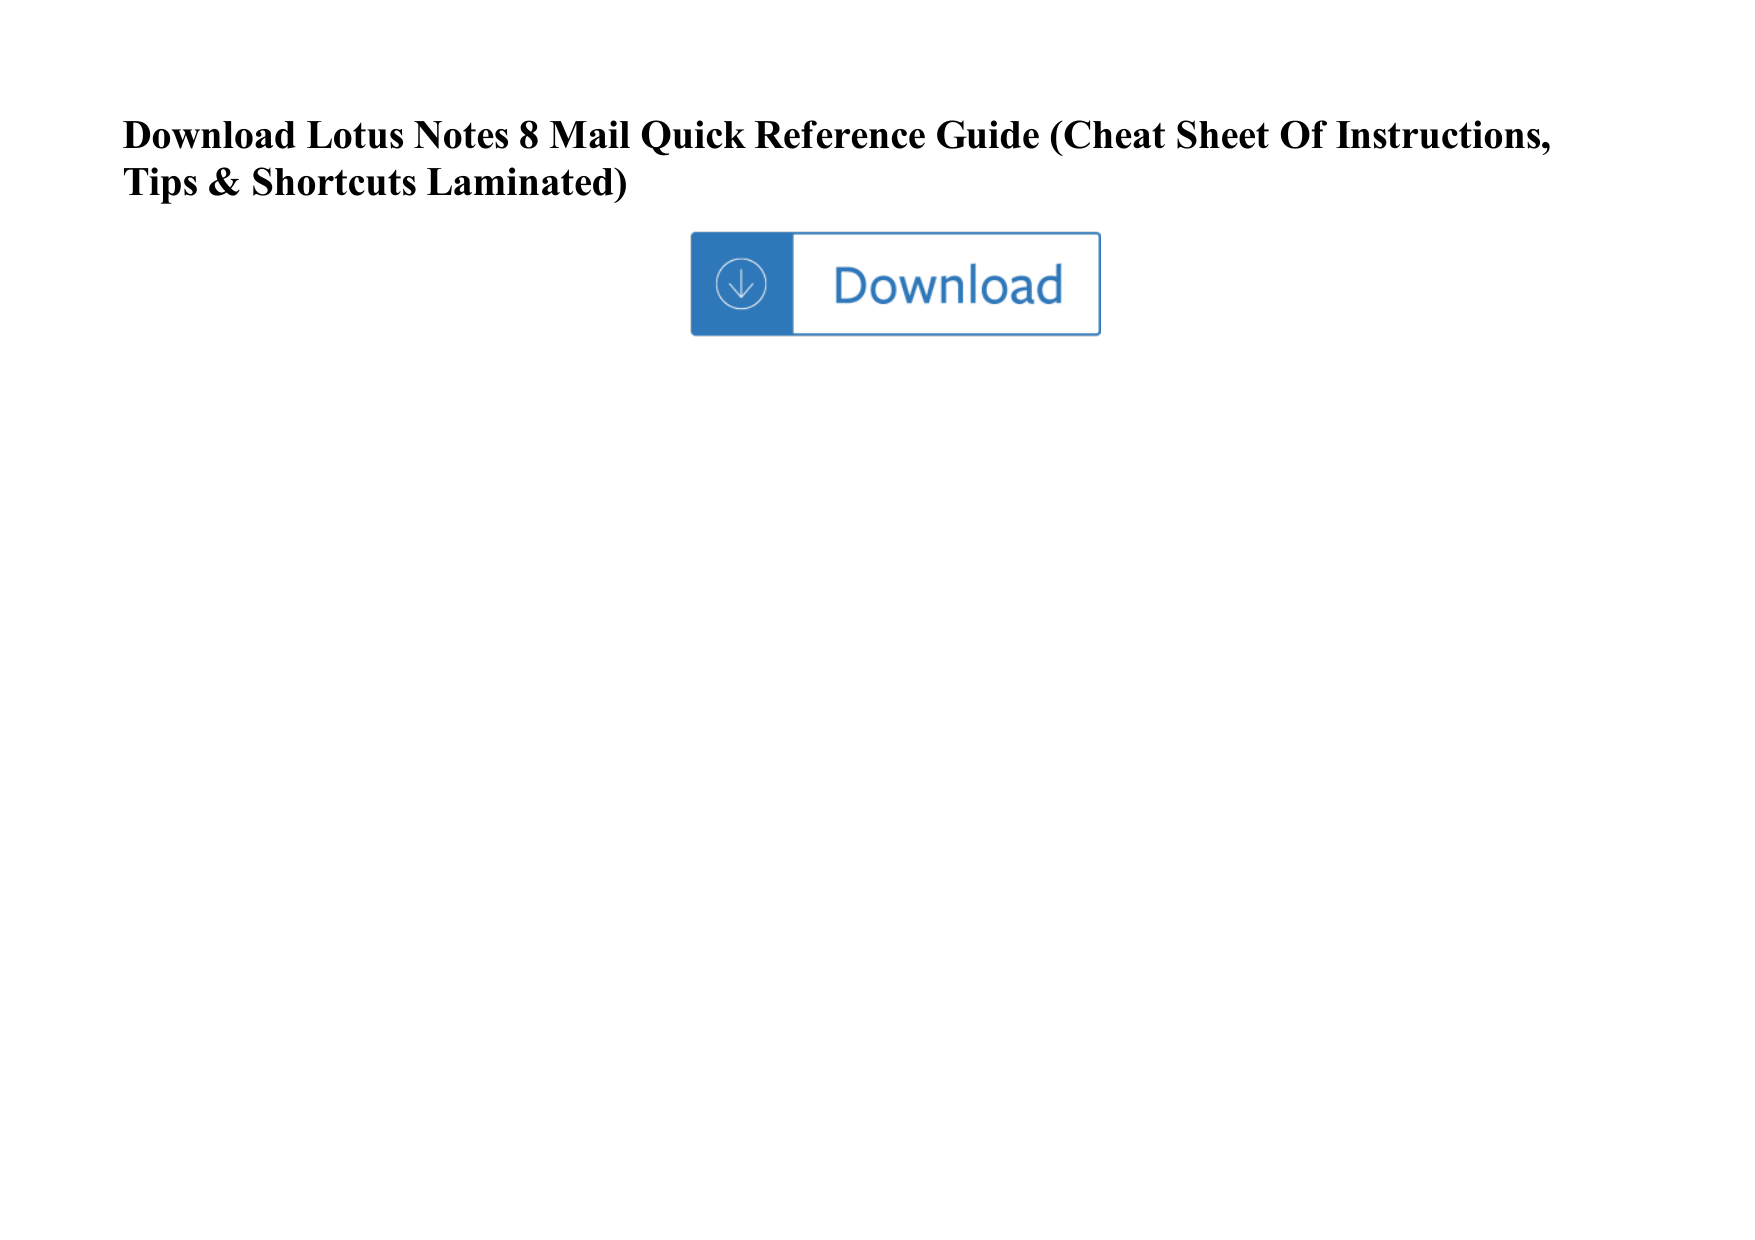 Page 1 of 1 - Lotus Notes 8 Mail Quick Reference Guide (Cheat Sheet Of Instructions, Tips & Shortcuts  Laminated) Lotus-notes-8-mail-quick-reference-guide-cheat-sheet-of-instructions-tips-shortcuts-laminated